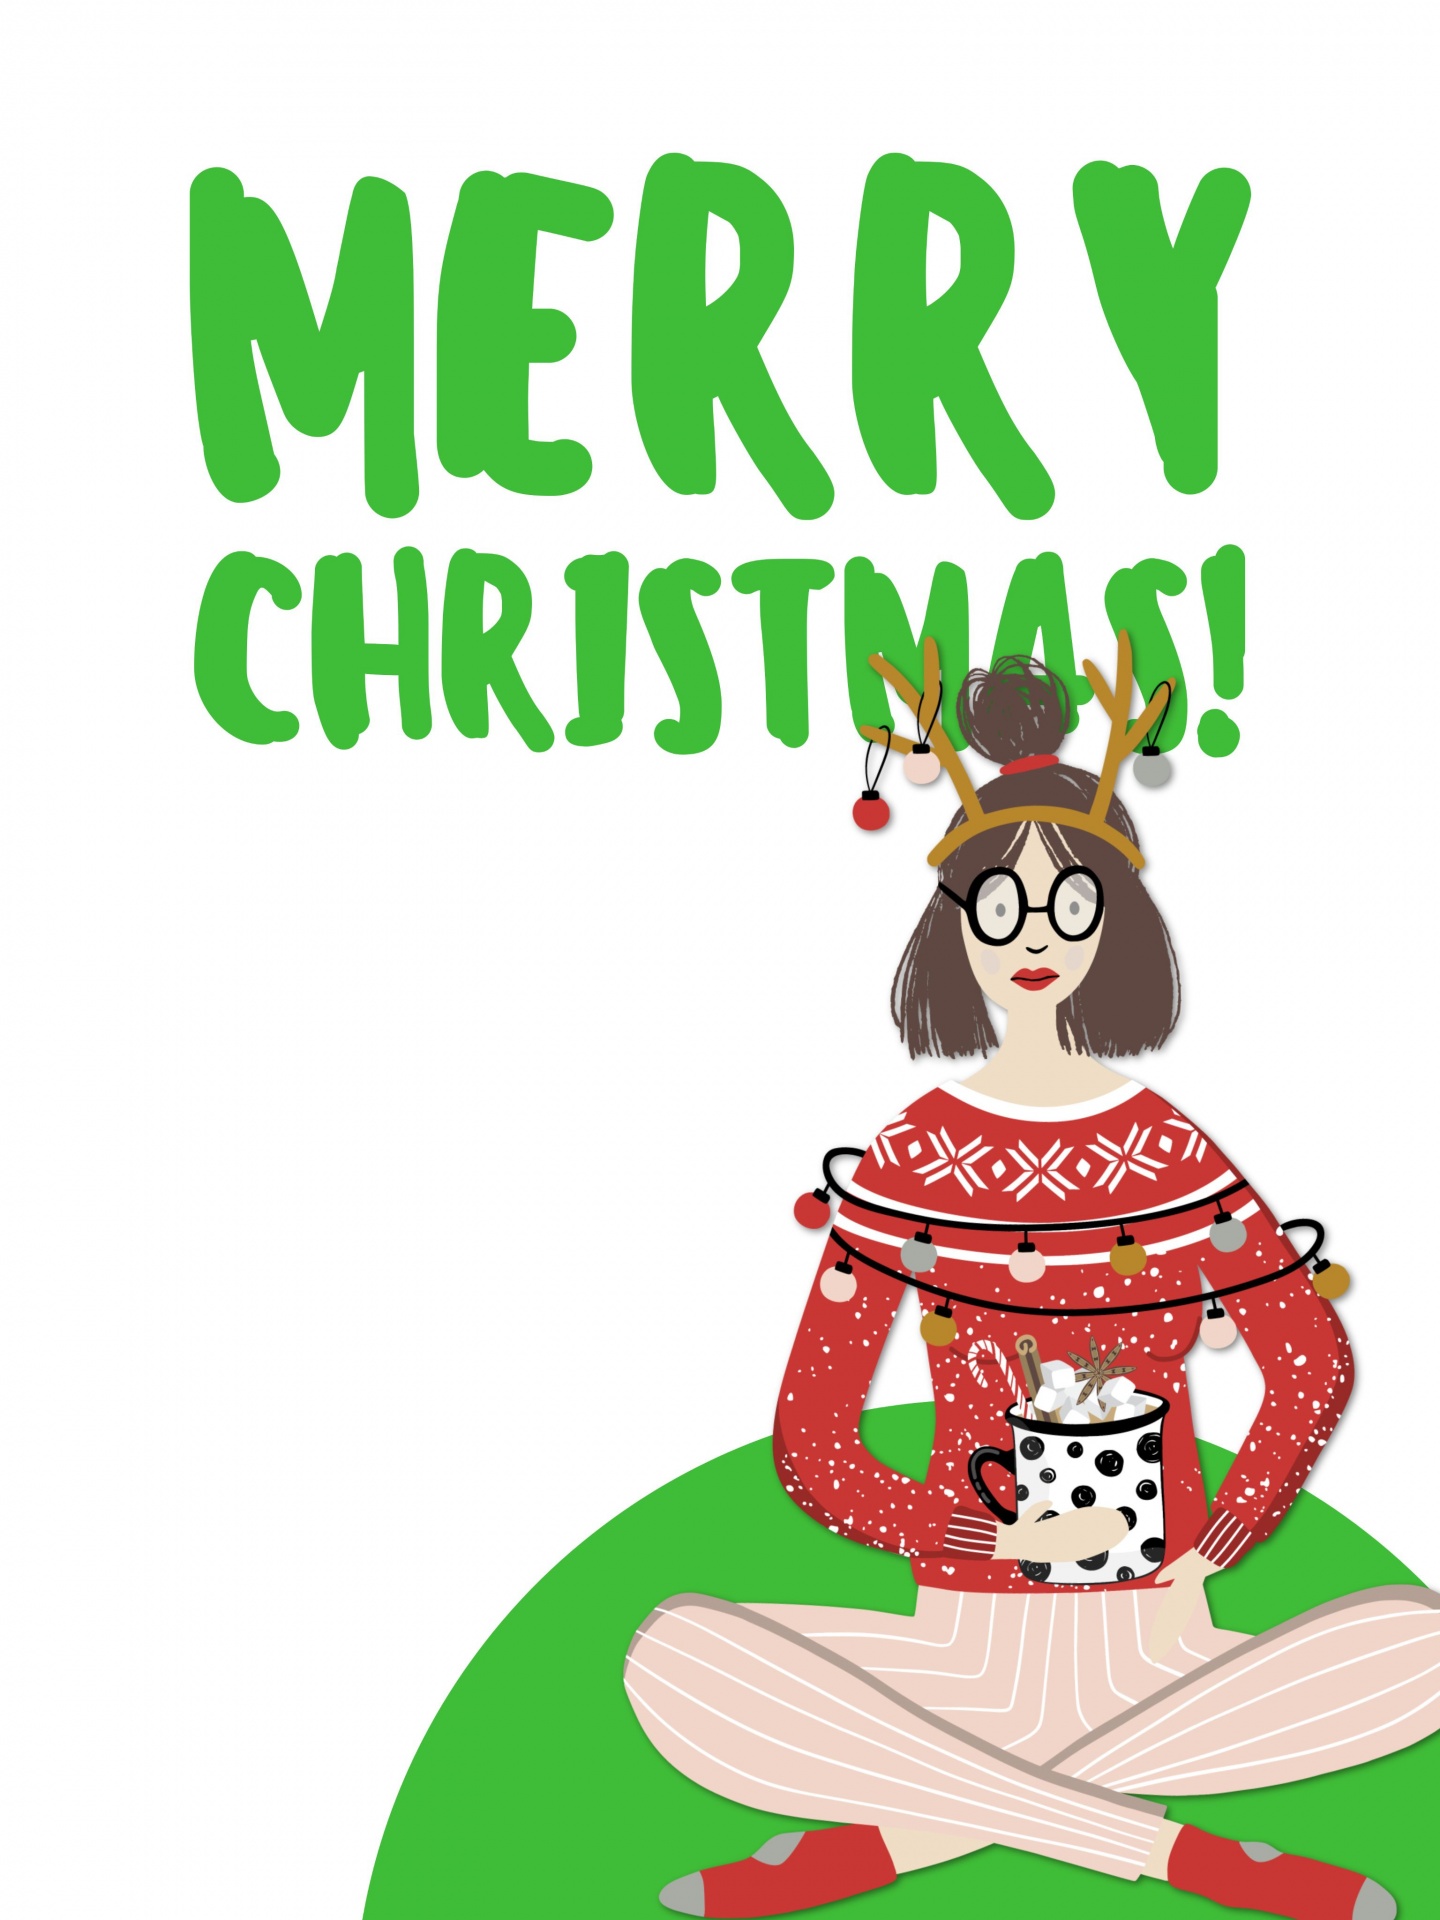 Christmas Illustration with Merry Christmas Greeting Featuring a woman sitting cross-legged with mod clothing